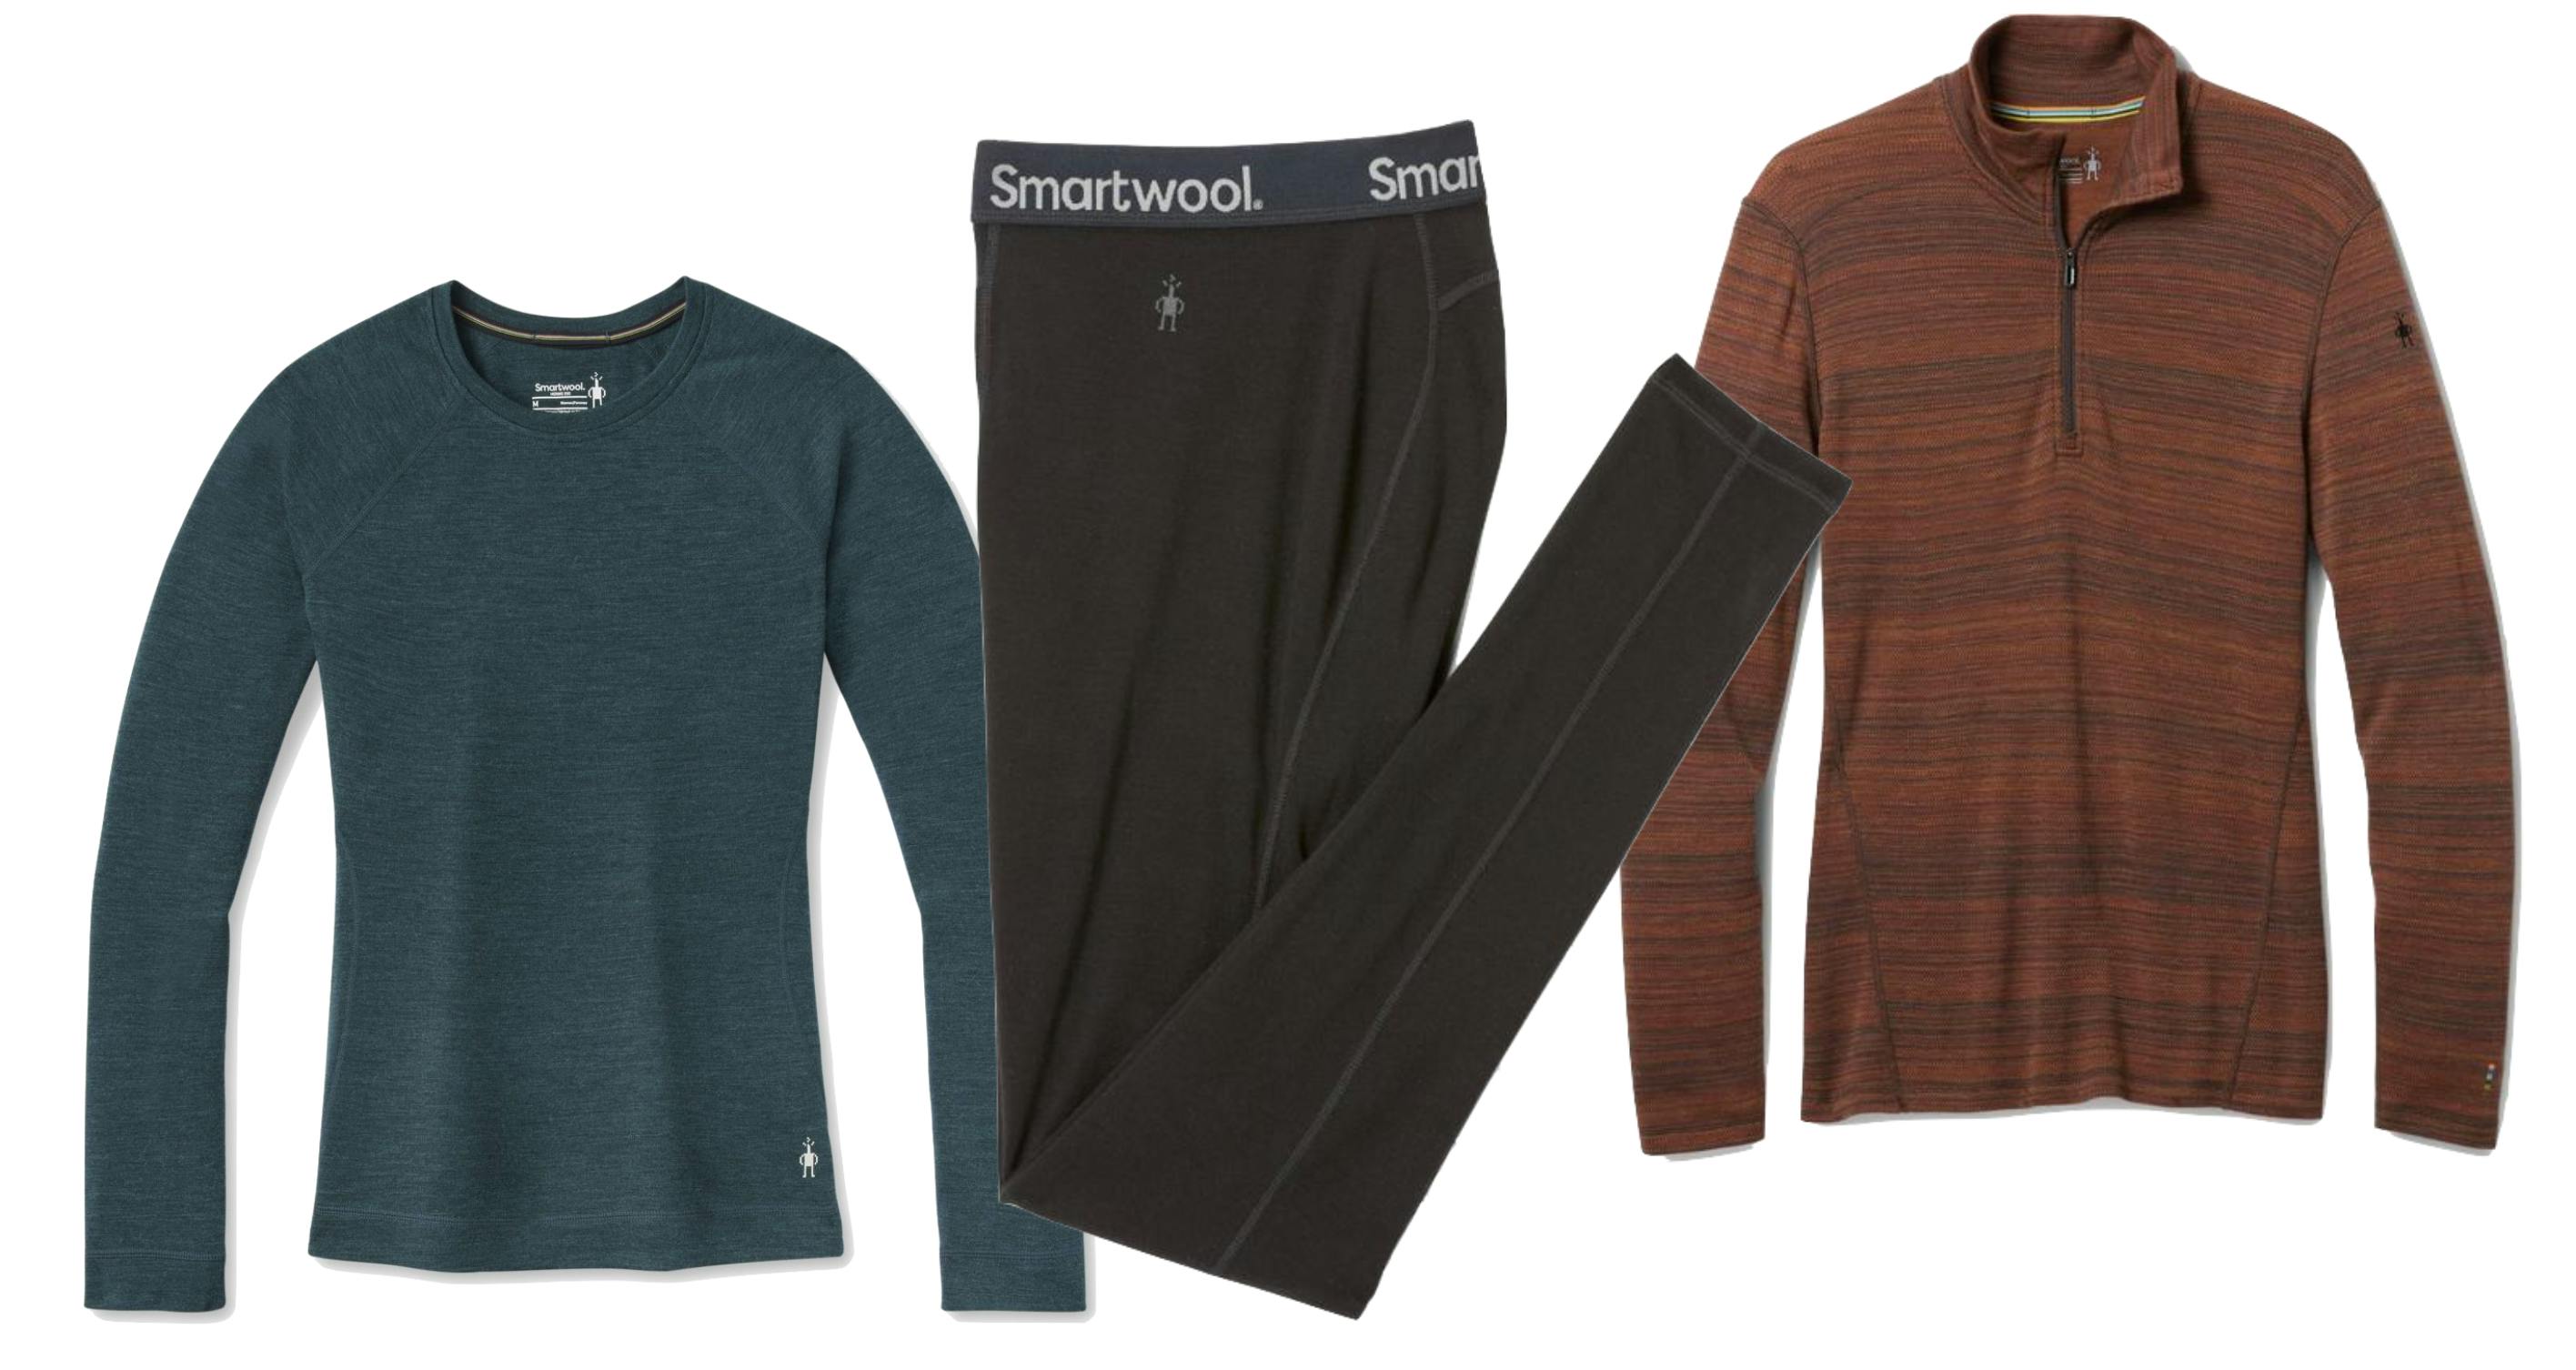 Product images of the Smartwool Women’s Classic Merino Base Layer Crew, the Smartwool Classic Merino Base Layer Bottom, and the Smartwool Men’s Classic Merino Thermal Base Layer Quarter-Zip. 